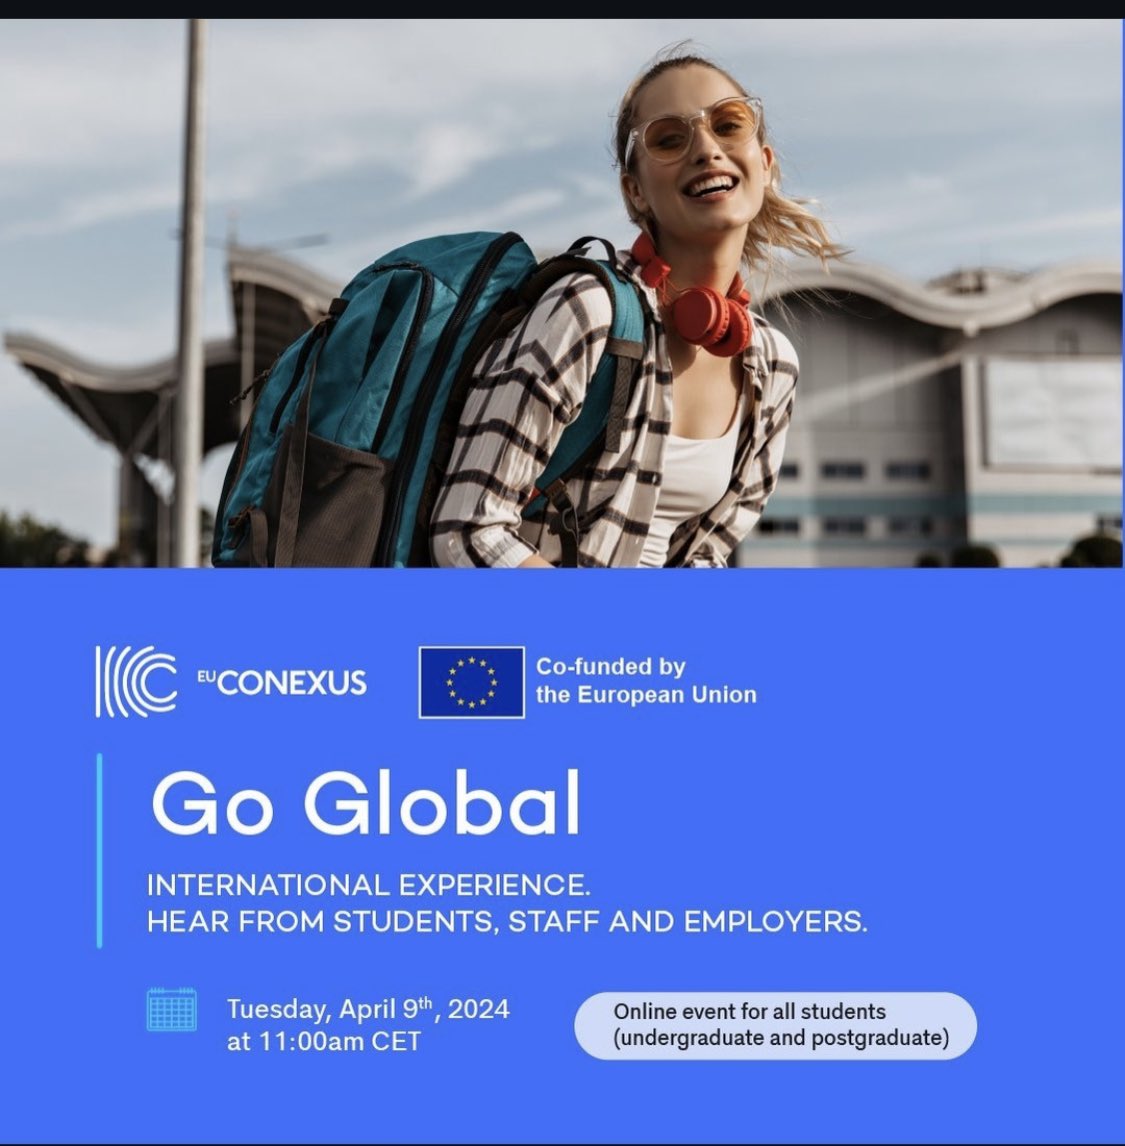 📣Calling all students!
💼Discover how international experiences can shape your future& career development
🌏Curious about studying or working abroad? Hear from students who have international experience
➡️#EUCONEXUS “Go Global” online event, link in bio
#euconexus #EUCareers